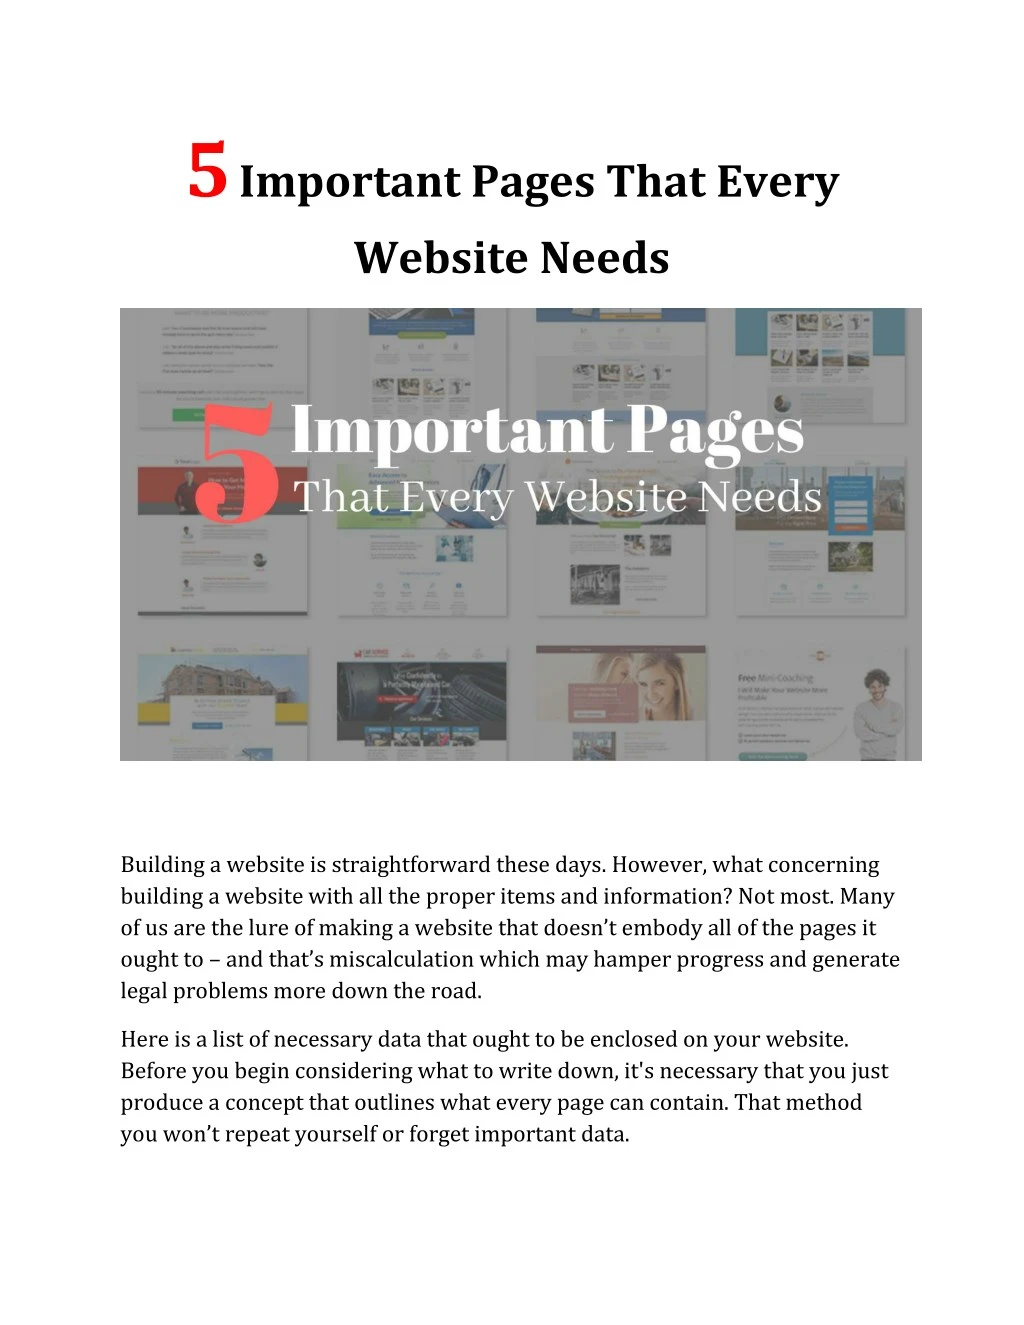 5 important pages that every website needs